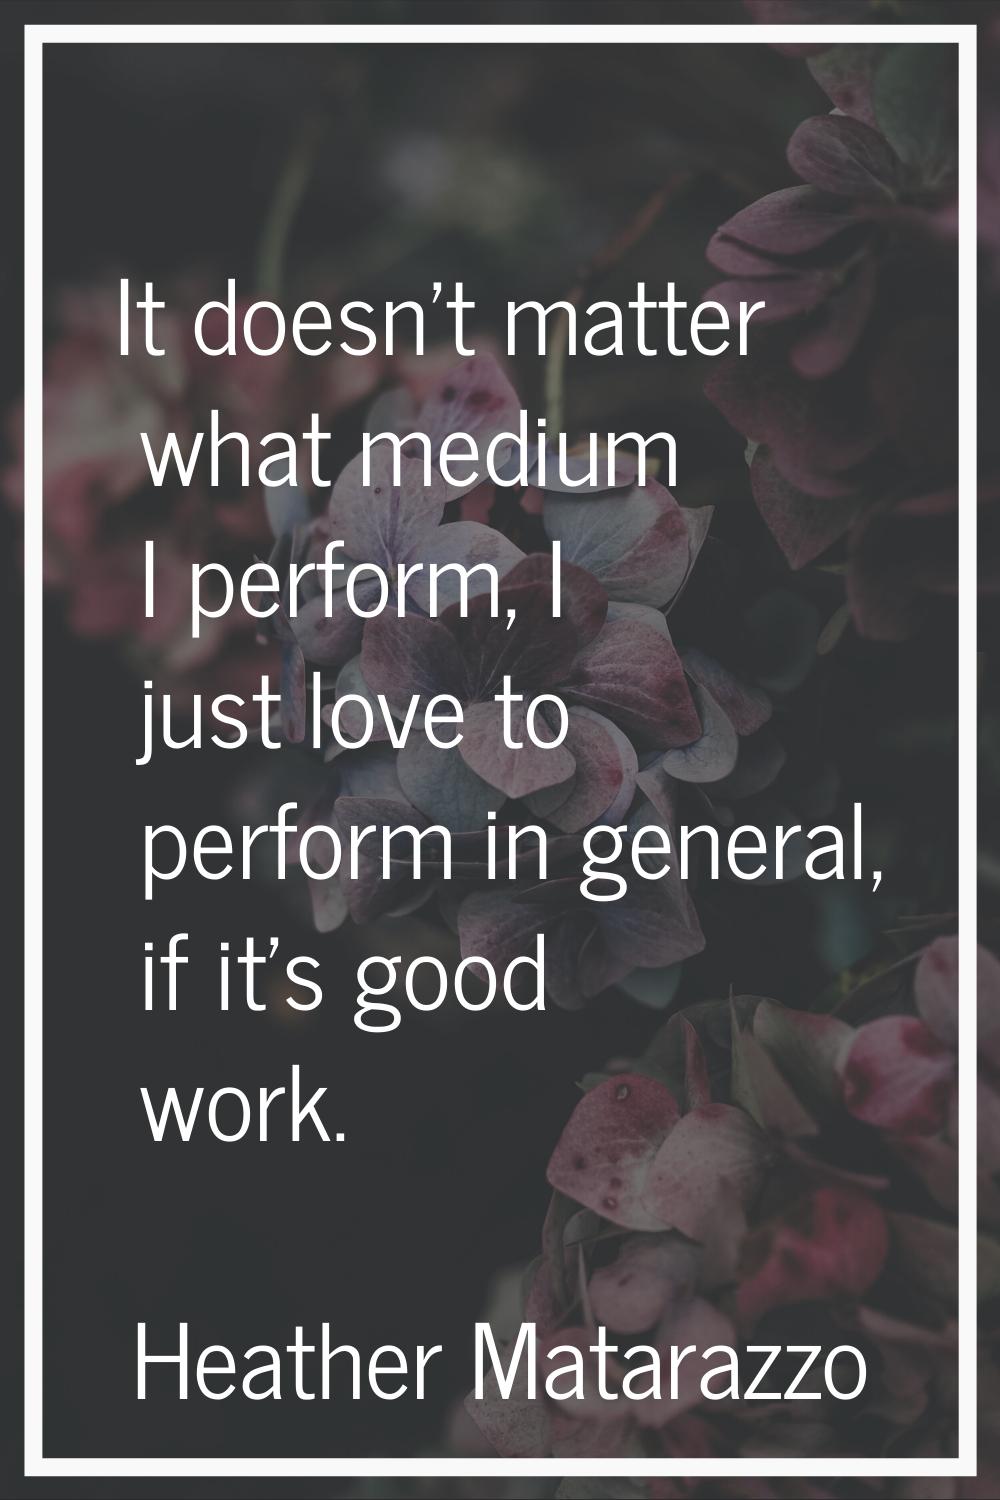 It doesn't matter what medium I perform, I just love to perform in general, if it's good work.